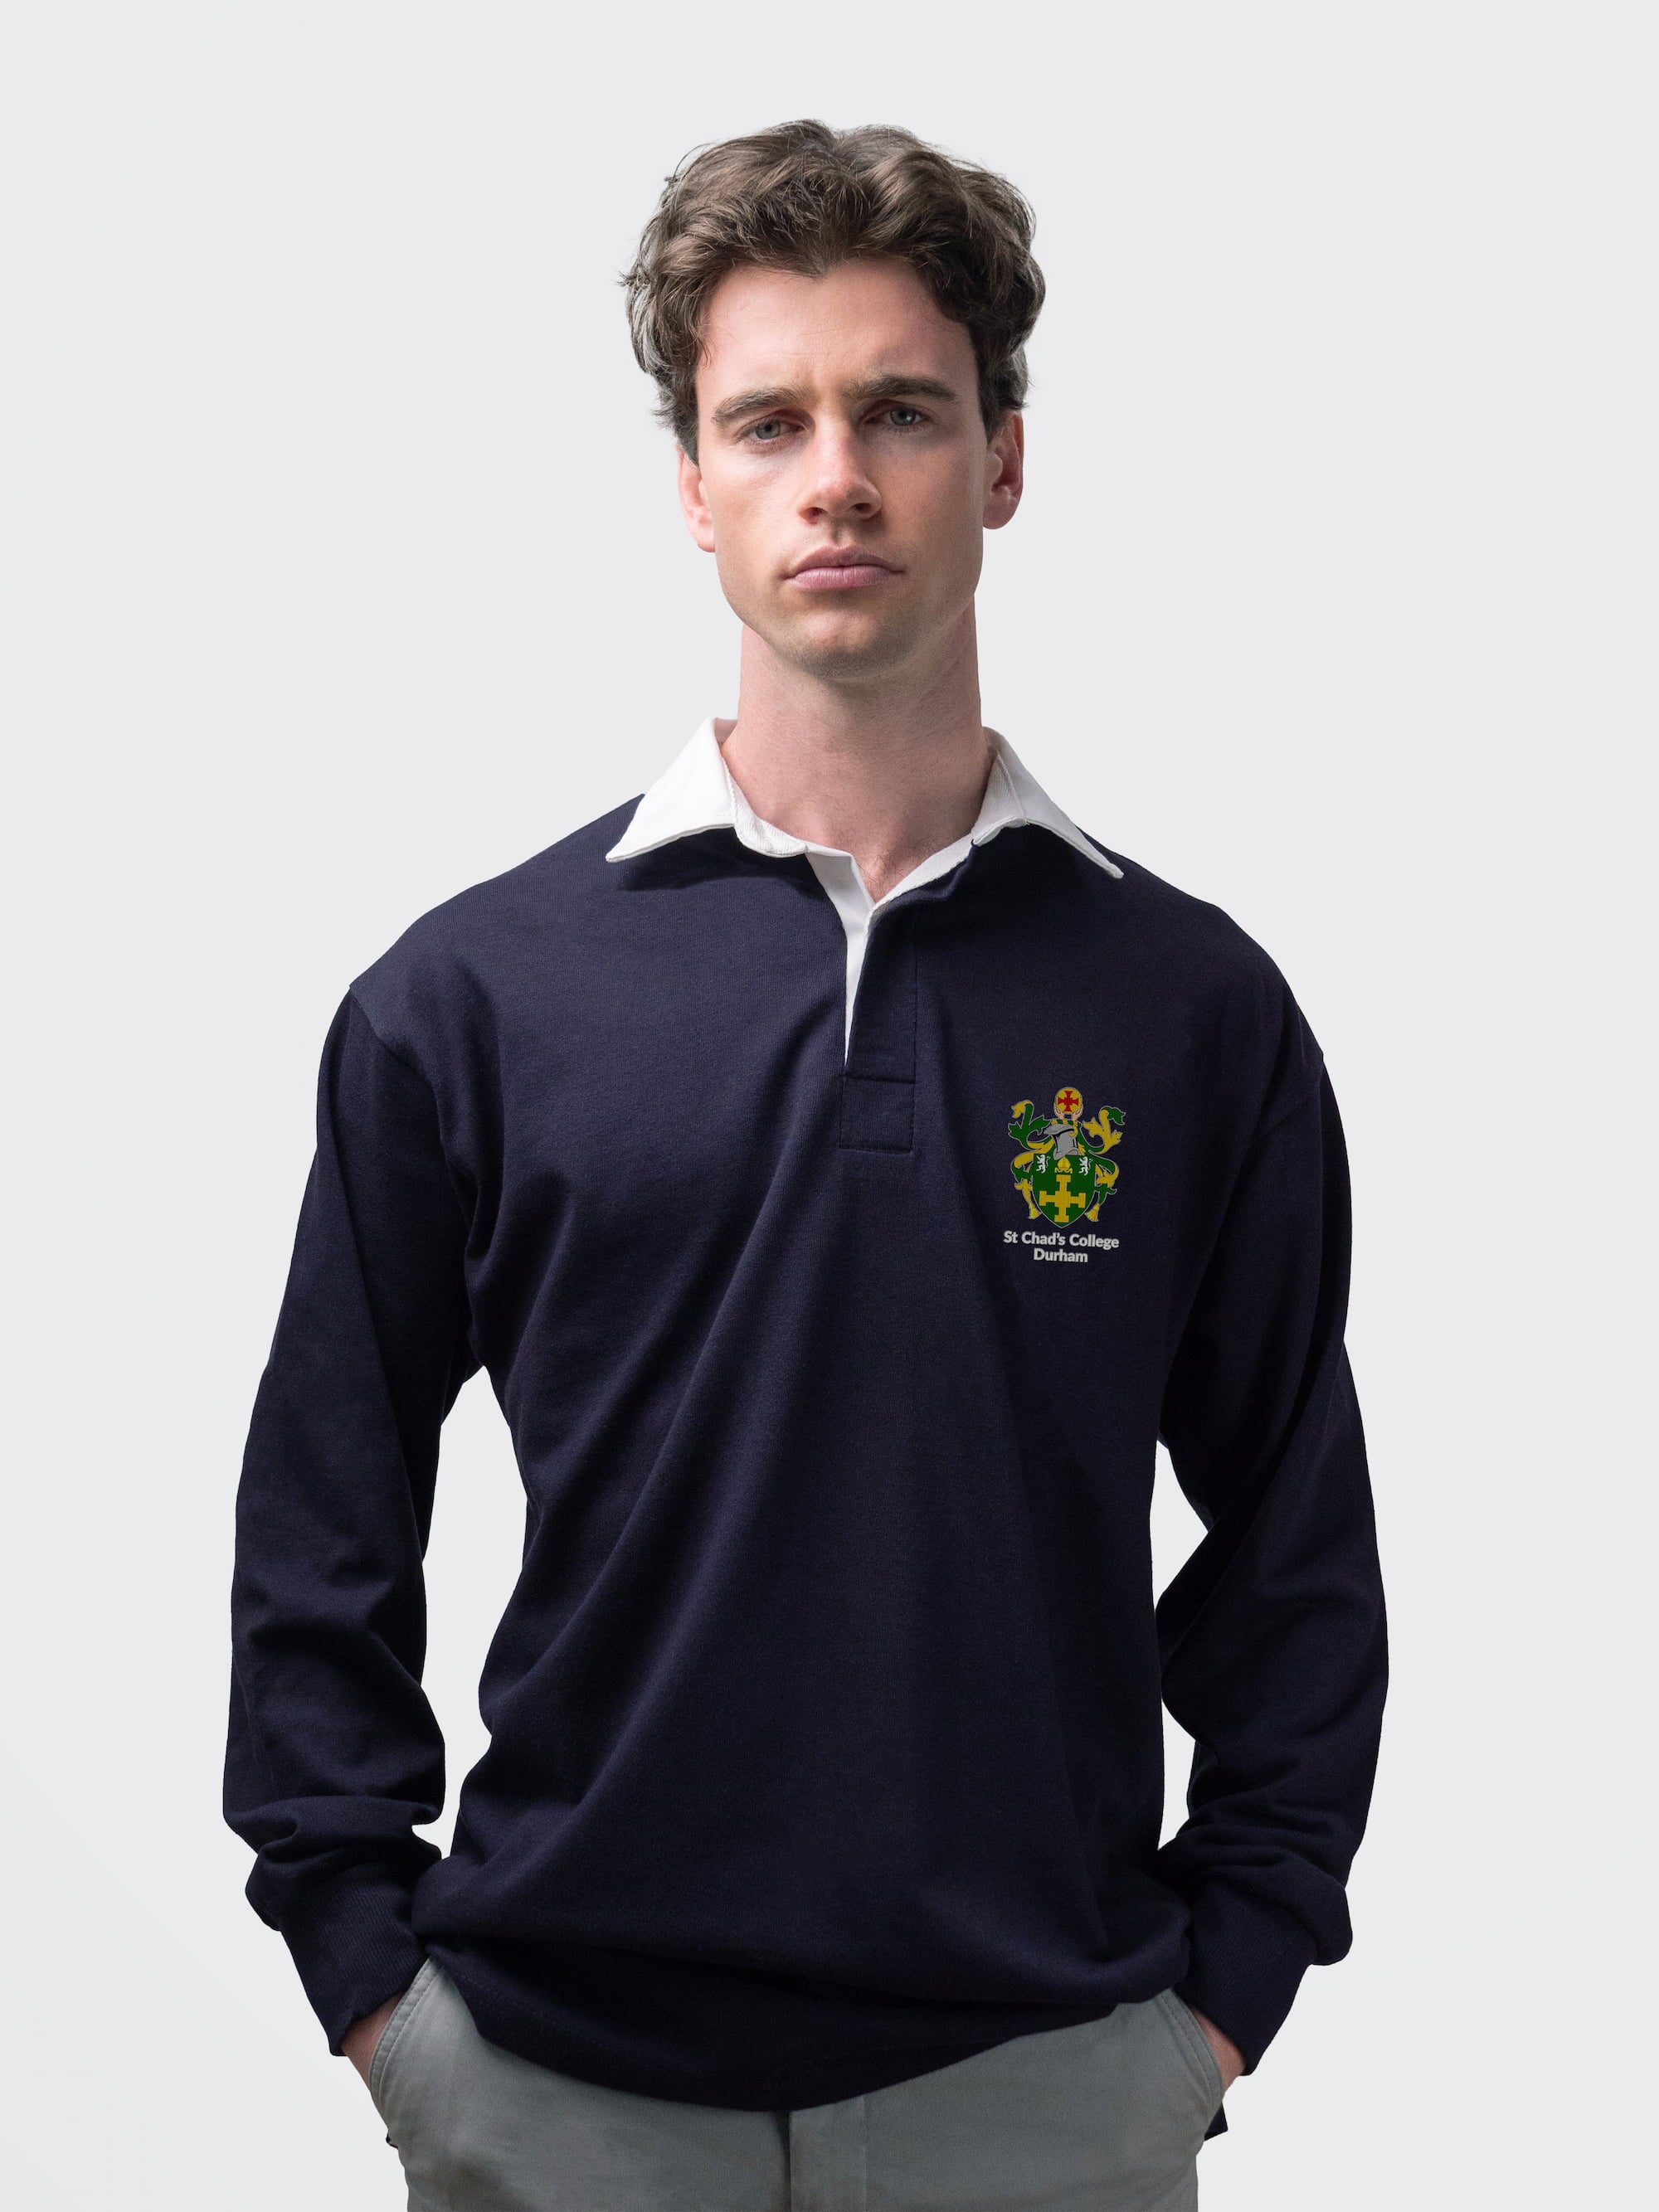 St Chad's student wearing an embroidered mens rugby shirt in navy